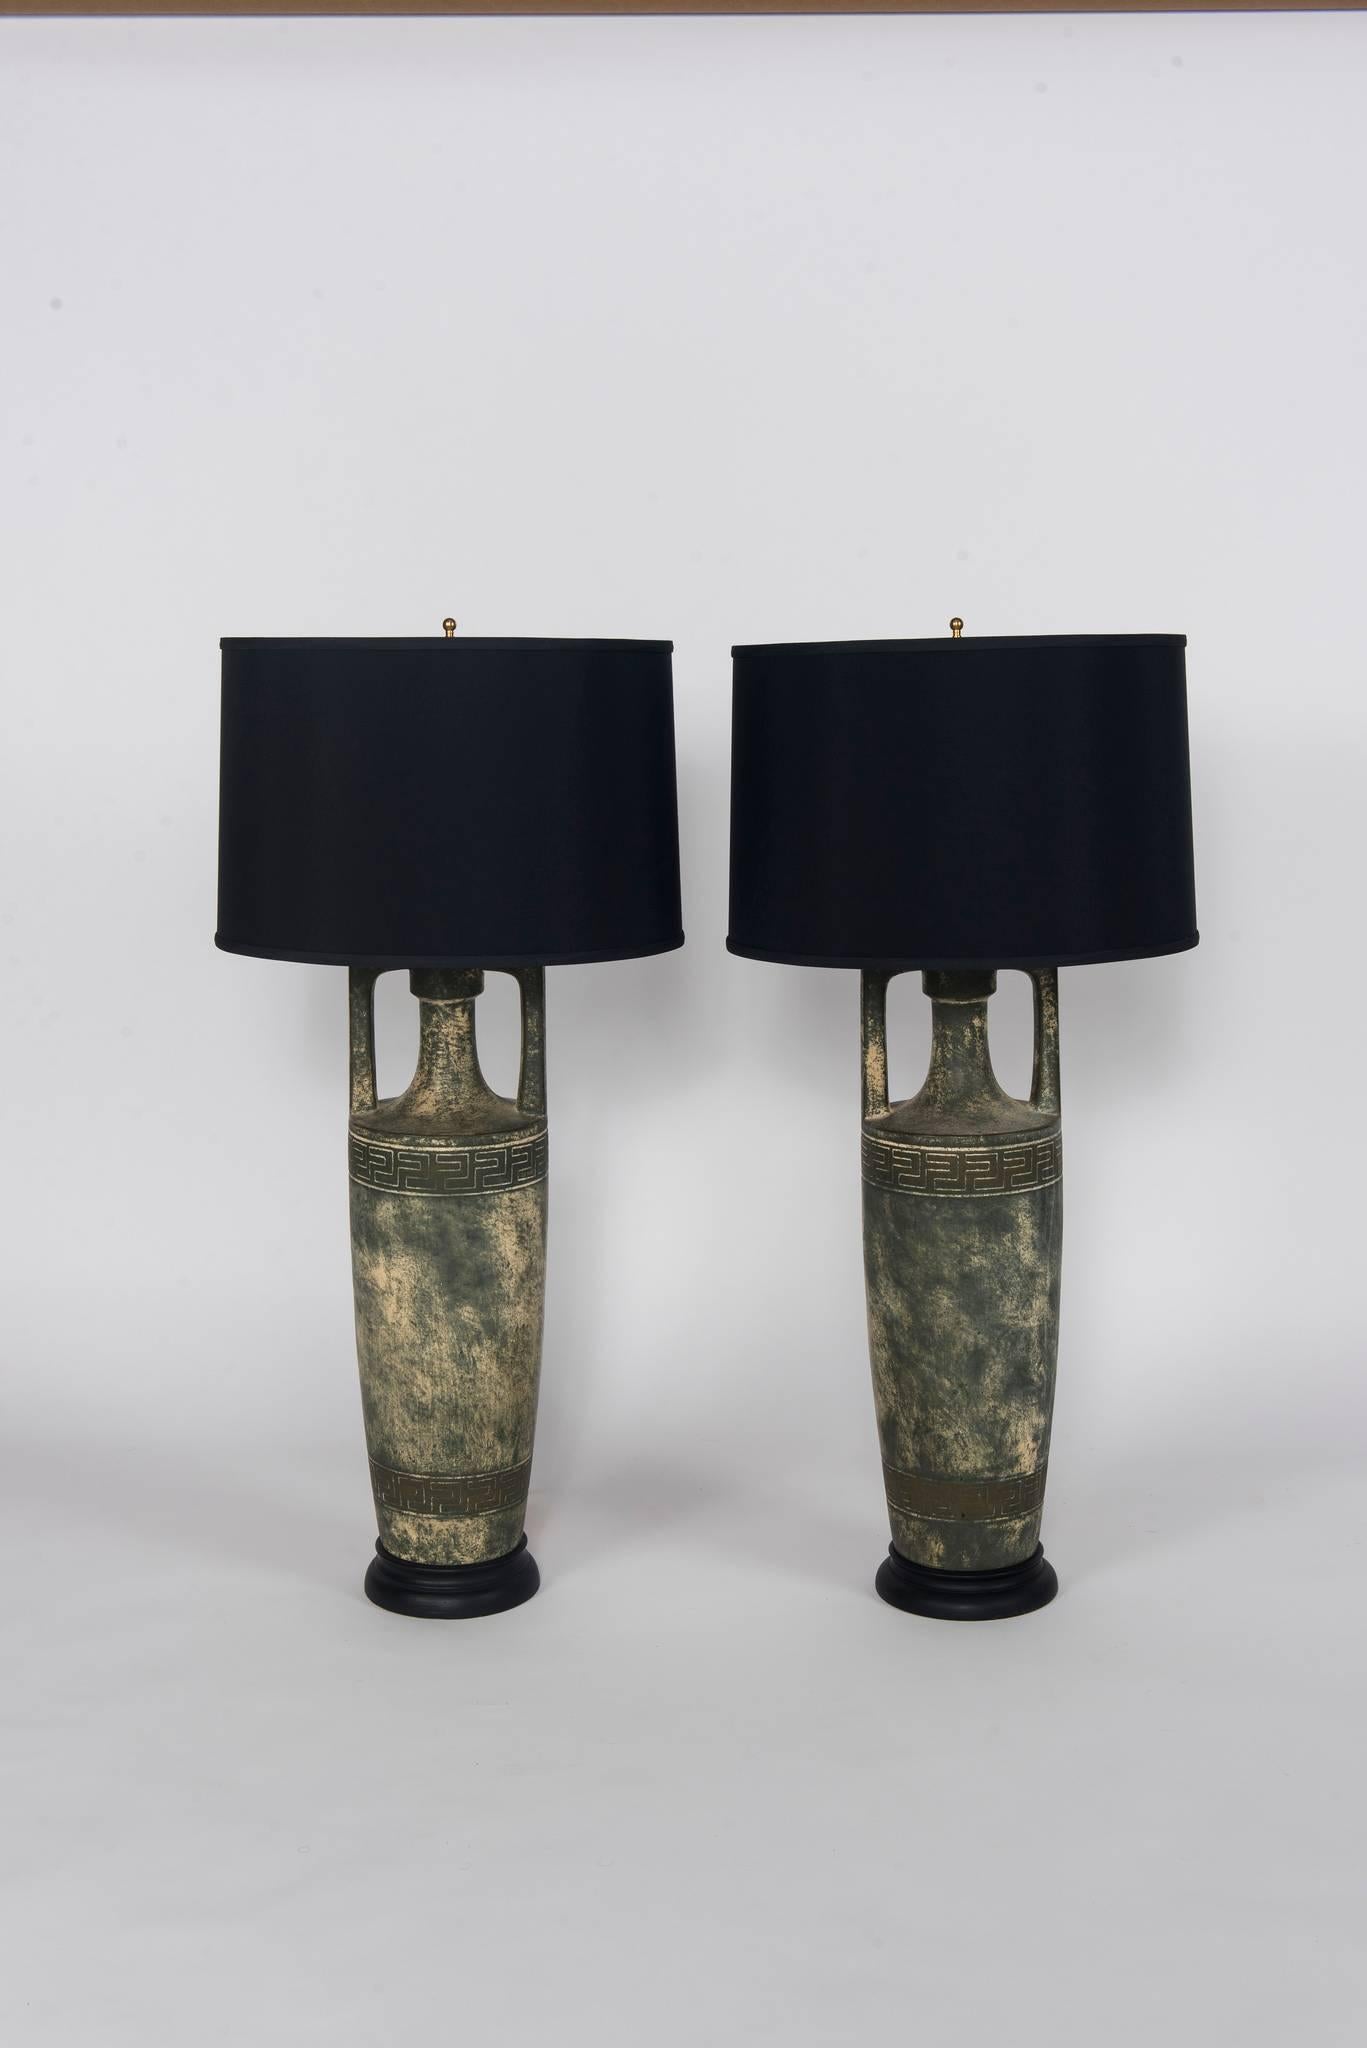 Pair of Greek key stoneware lamps with black shades.